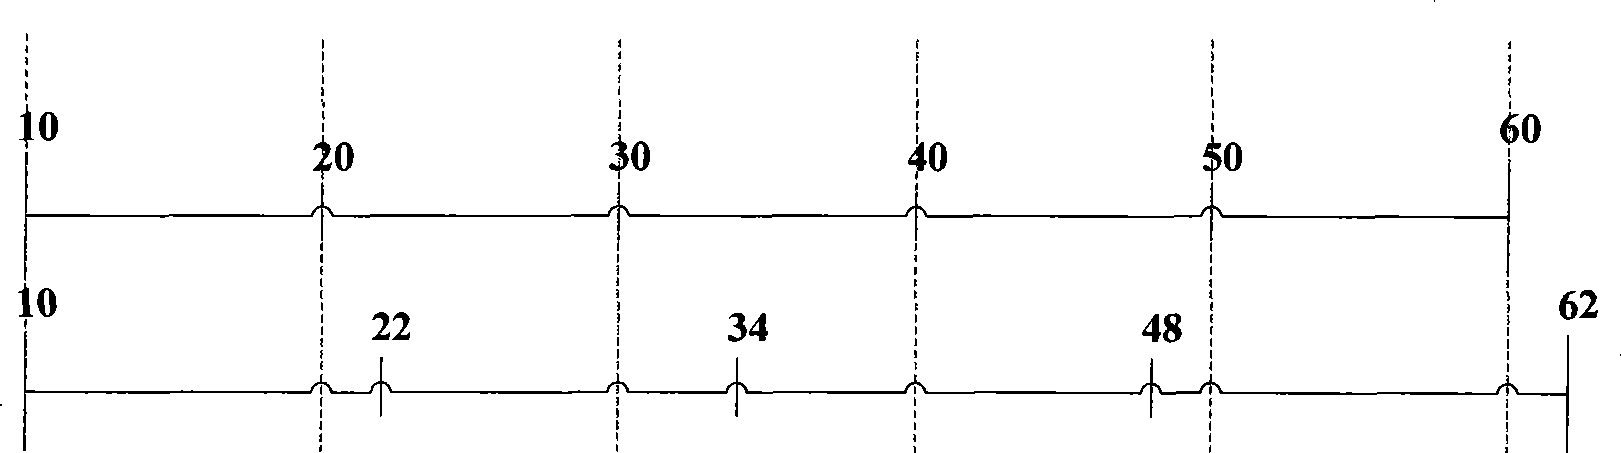 History data acquisition method for monitoring system